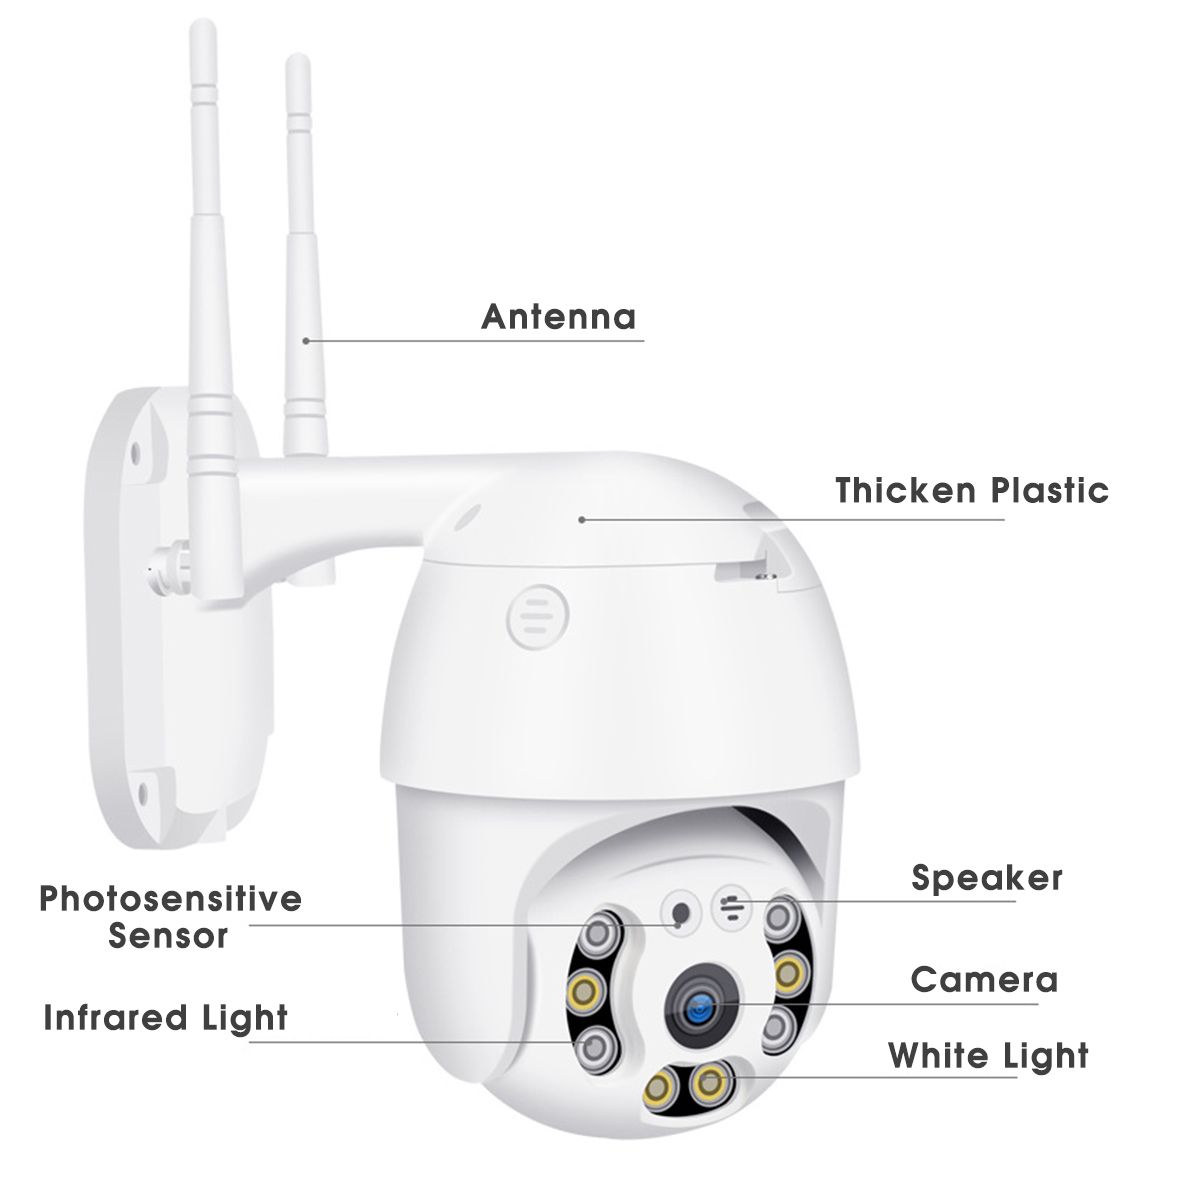 Full-color-Night-Vision-PTZ-IP-Camera-1080P-HD-20MP-WIFI-Security-Surveillance-Outdoor-Speed-Dome-Ca-1568993